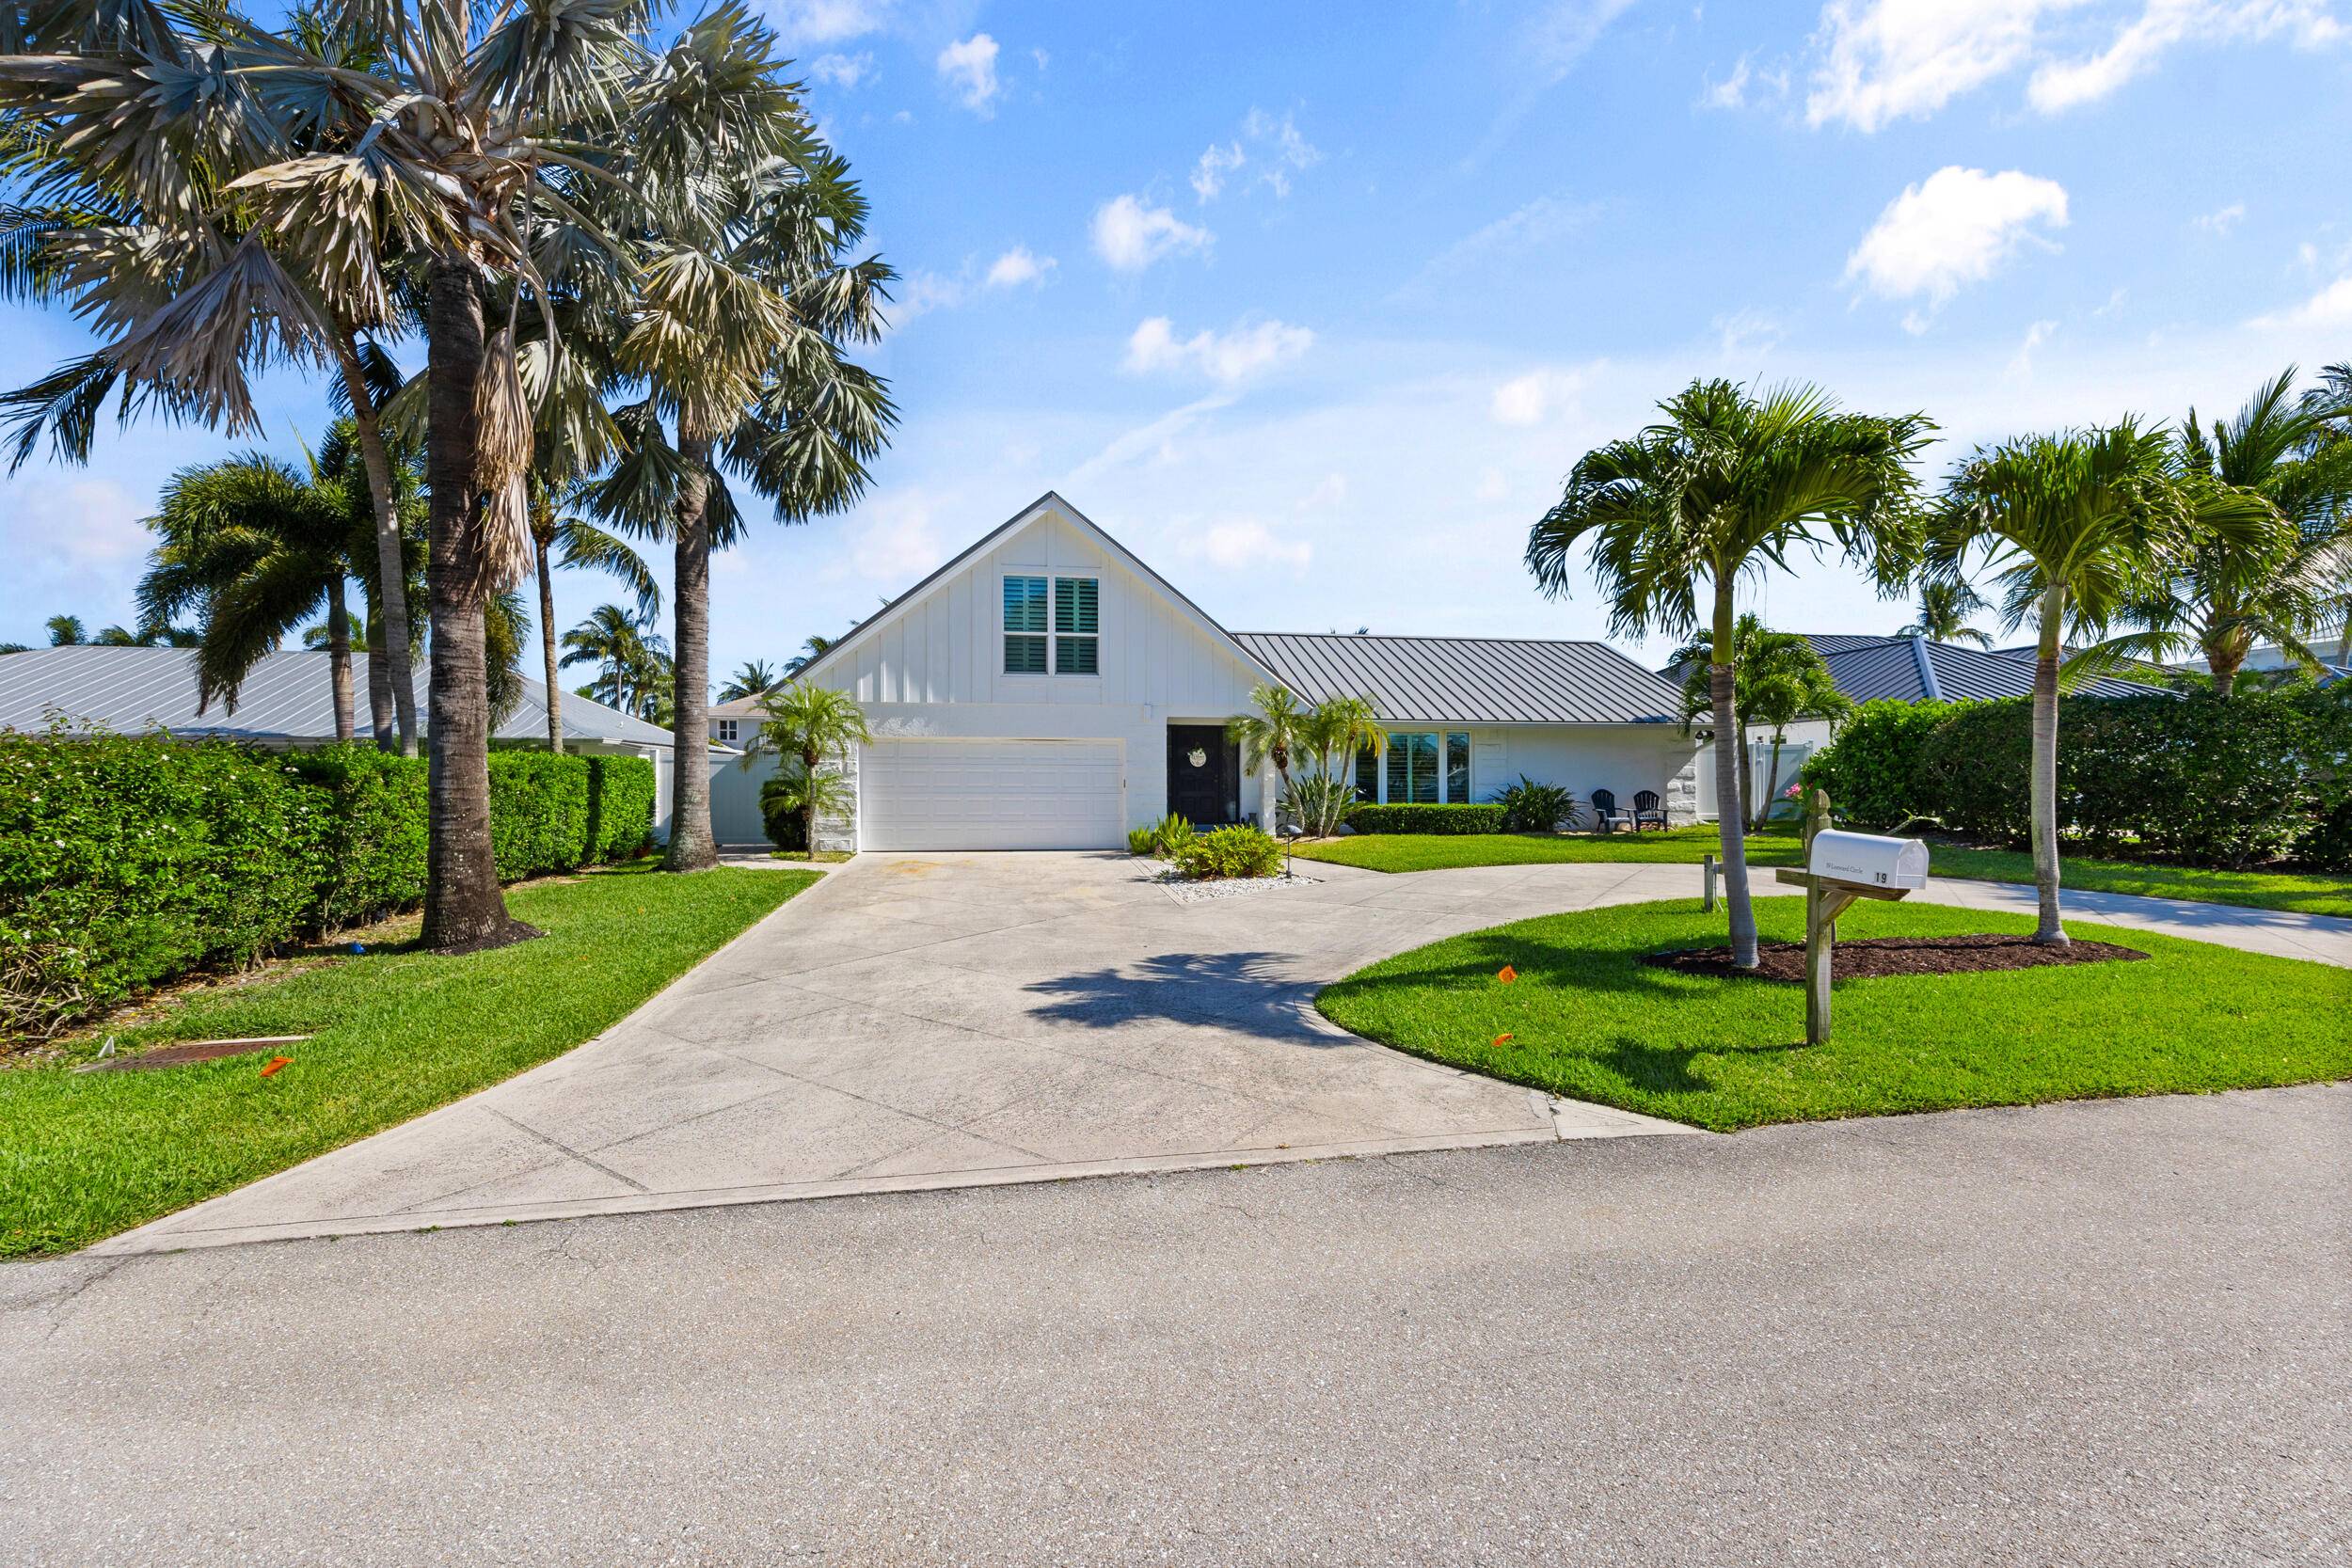 The best of everything in the peaceful Village of Tequesta.